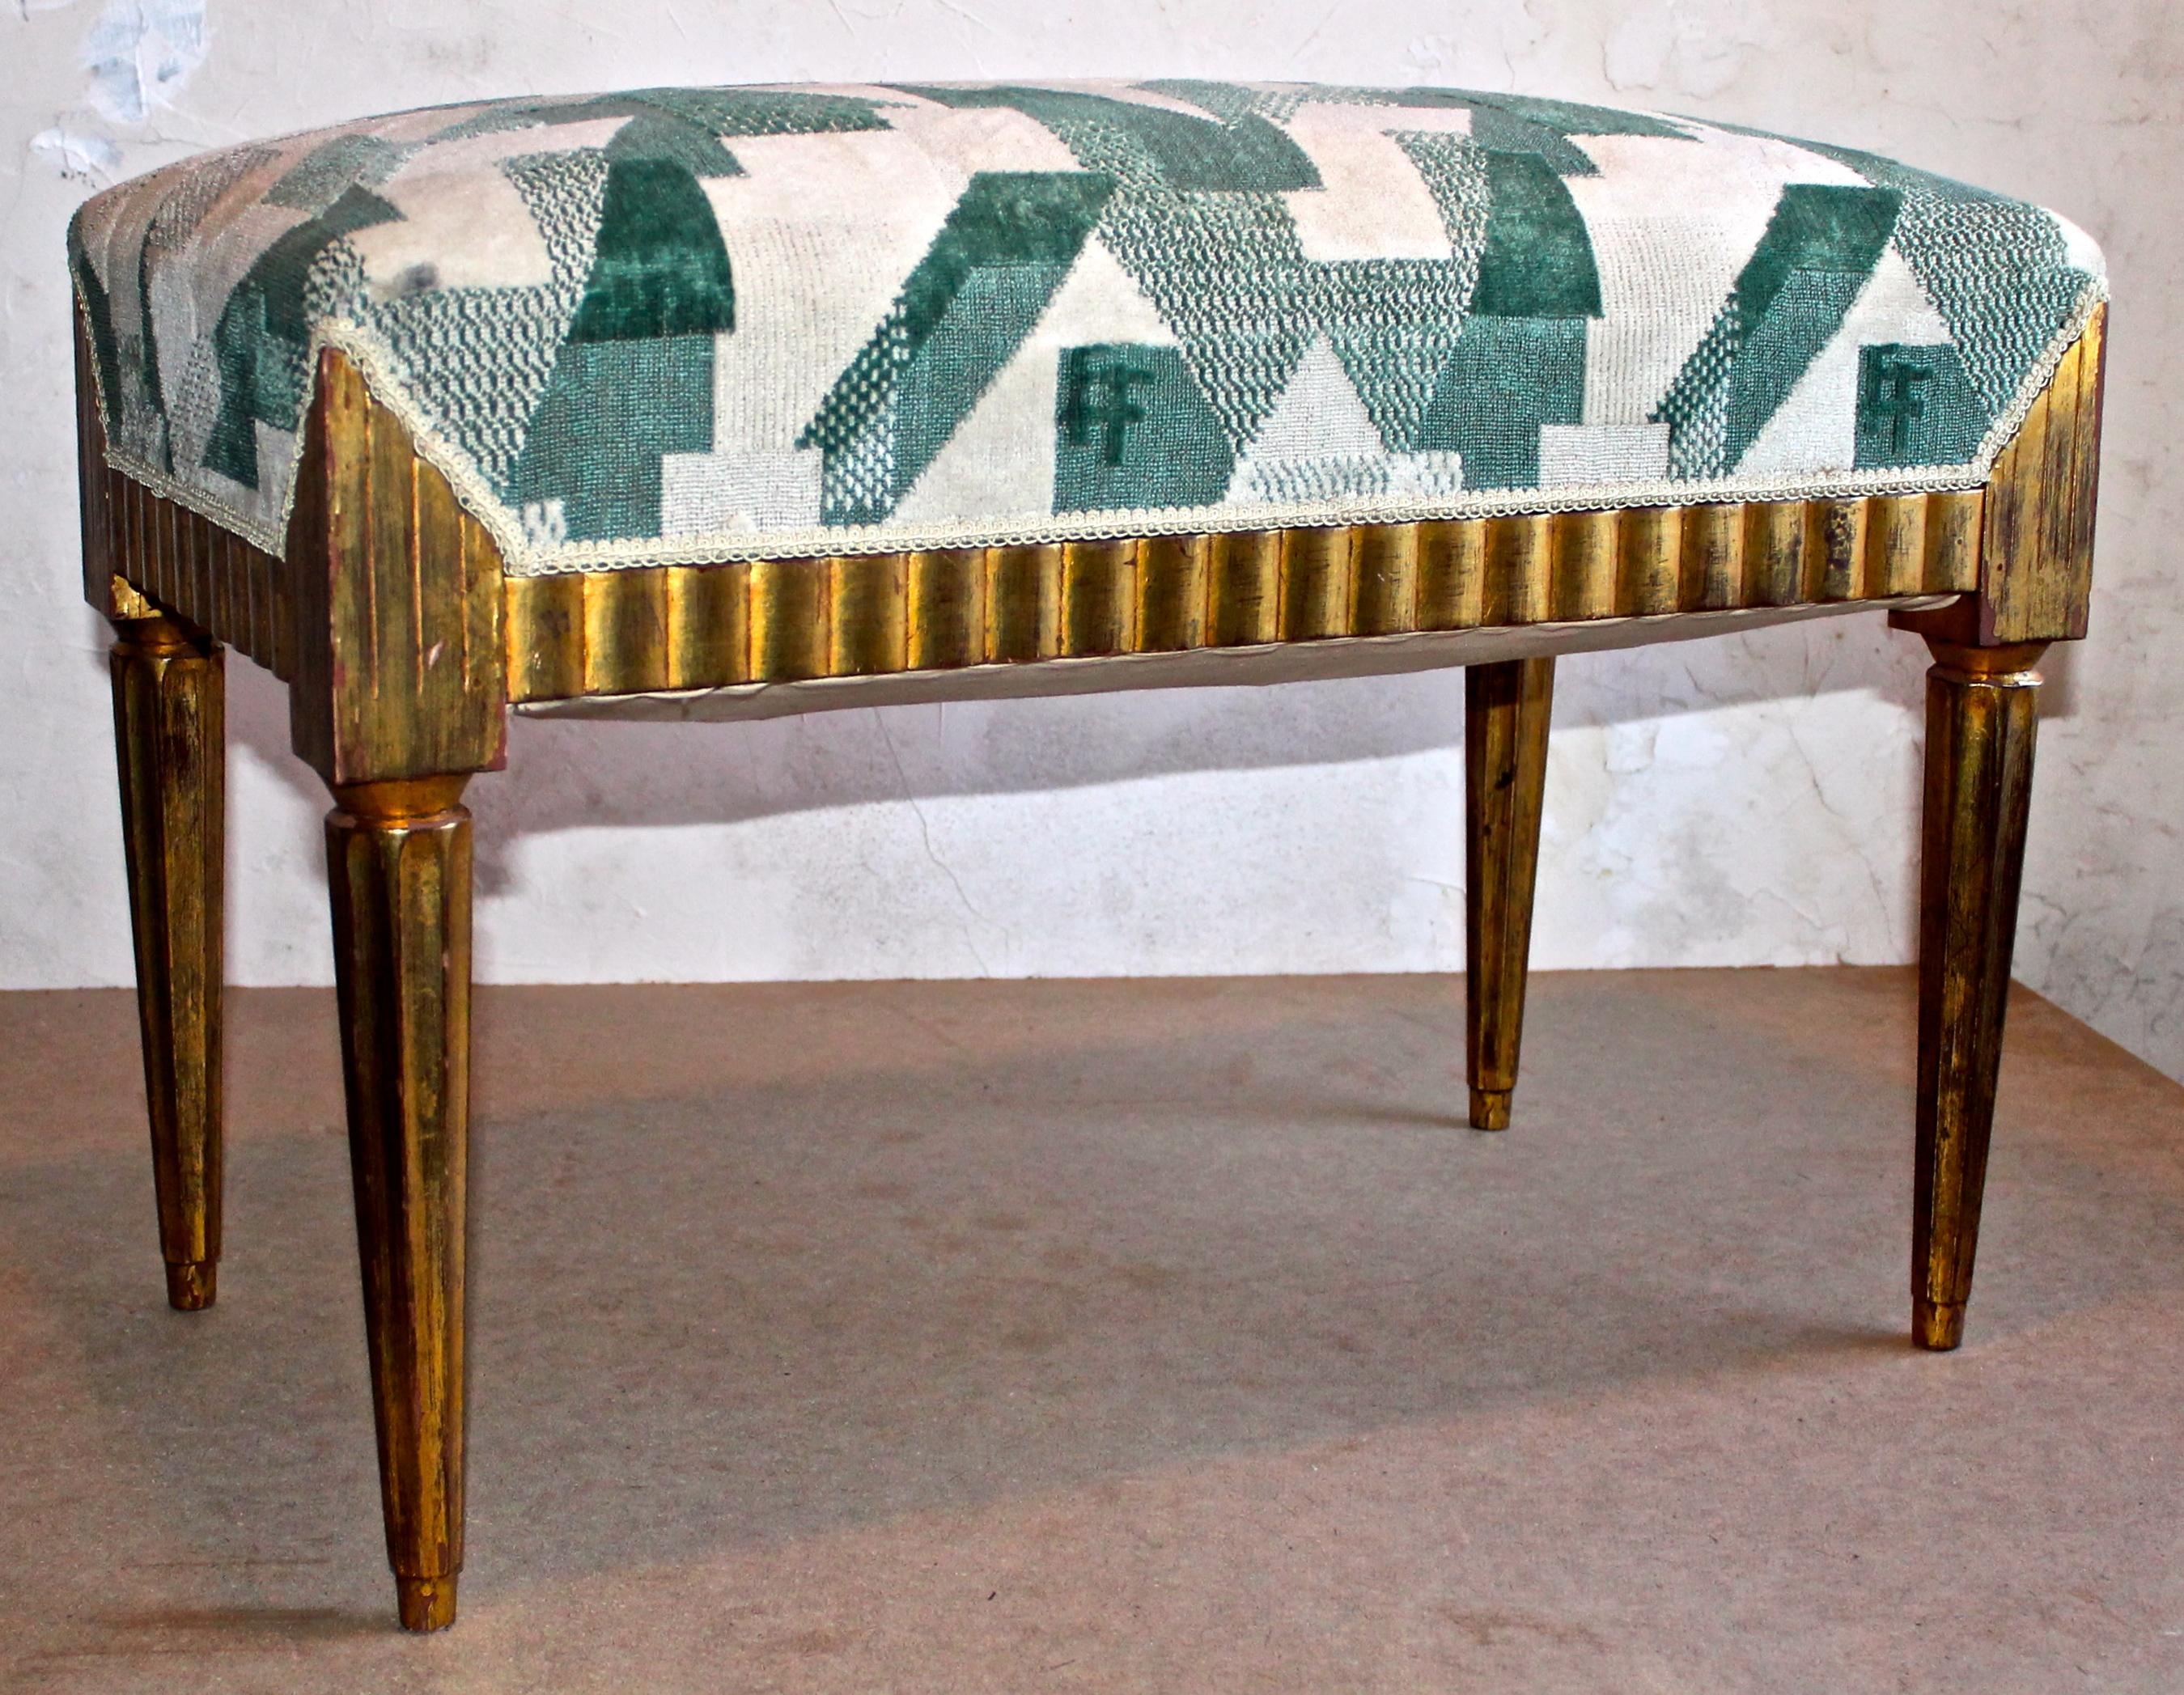 Gold leafed wood with early green deco upholstery. Louis XVI meets Chrysler building.